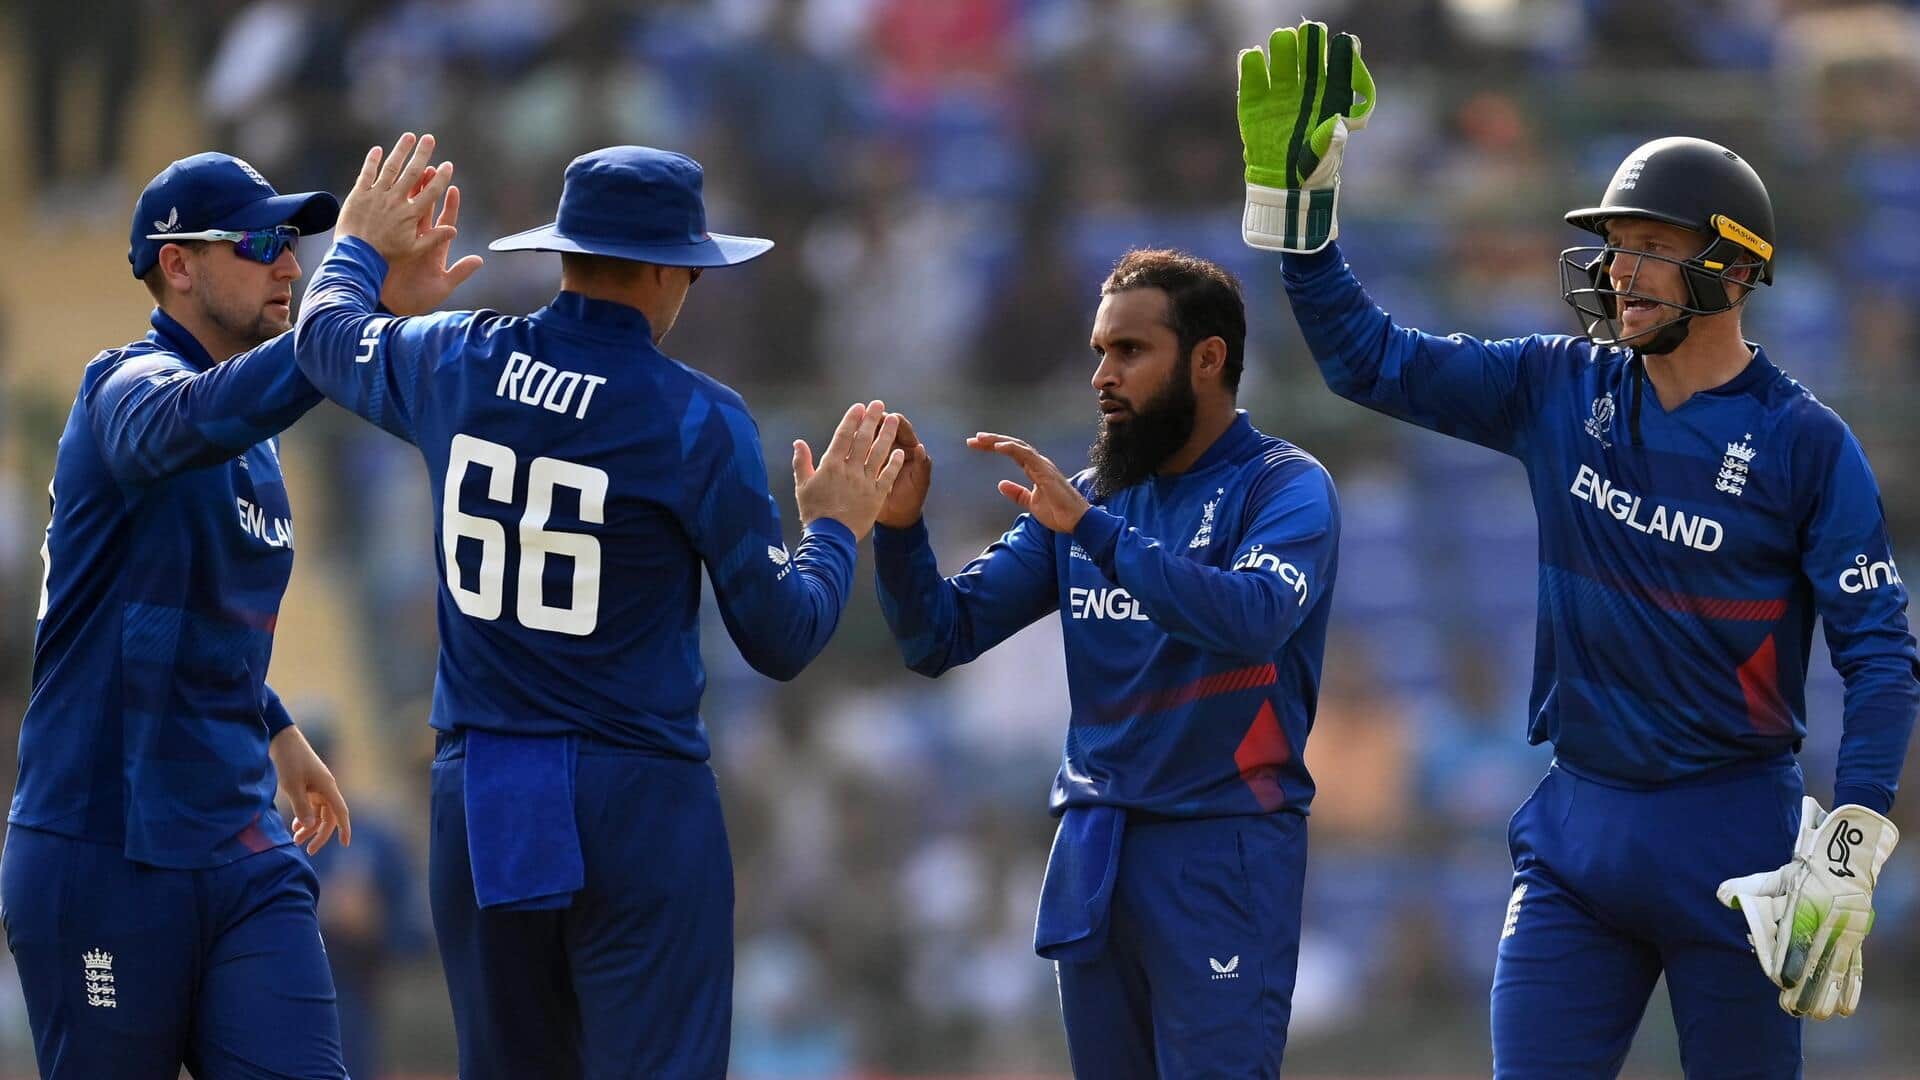 Adil Rashid records his best World Cup bowling figures: Stats